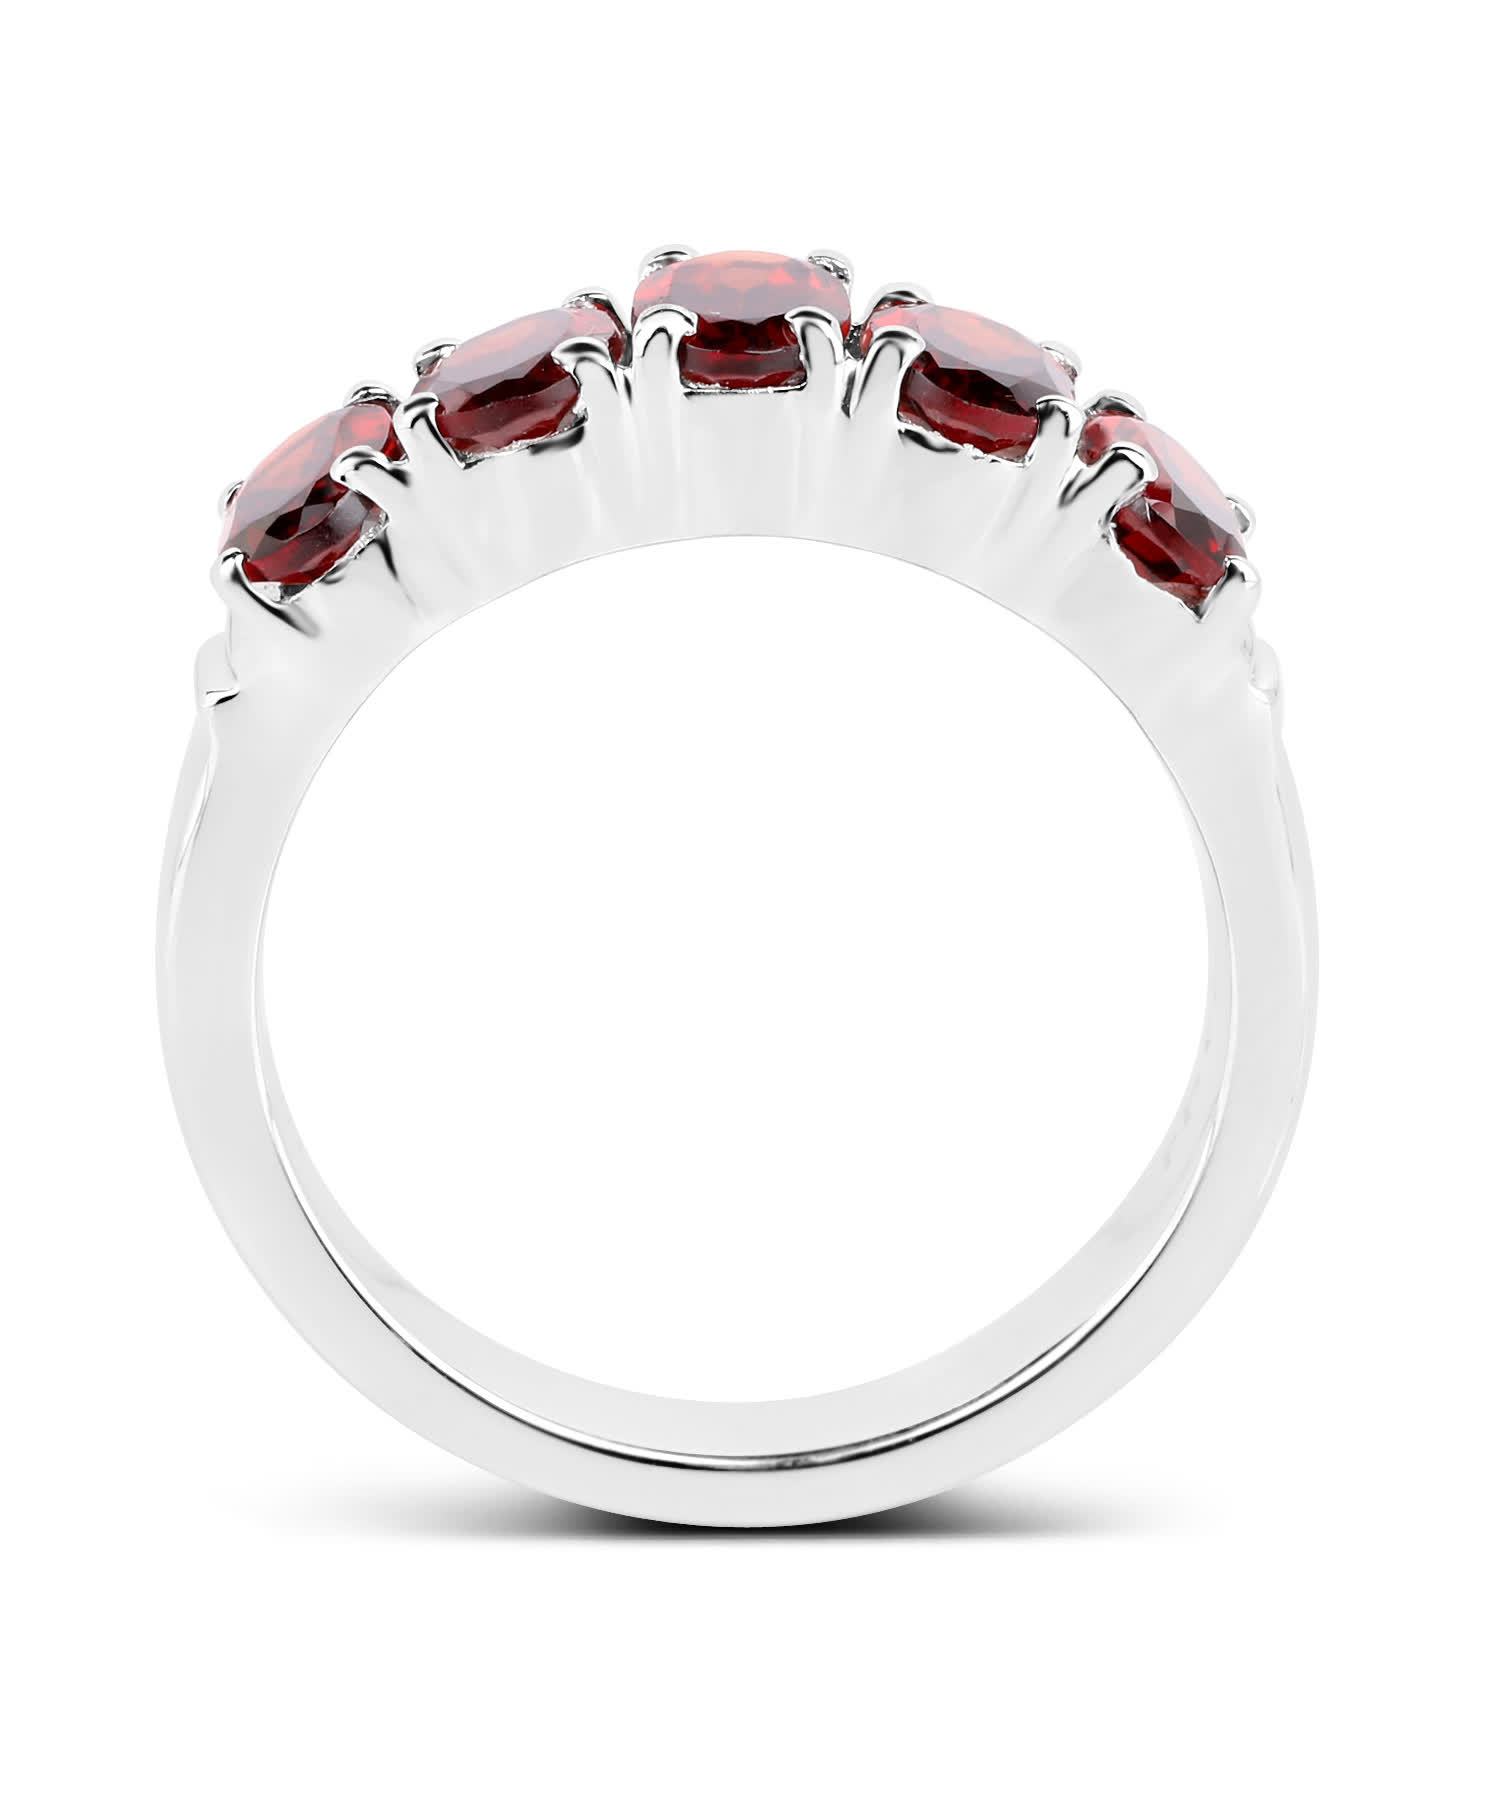 2.55ctw Natural Garnet Rhodium Plated 925 Sterling Silver Fashion Band View 2